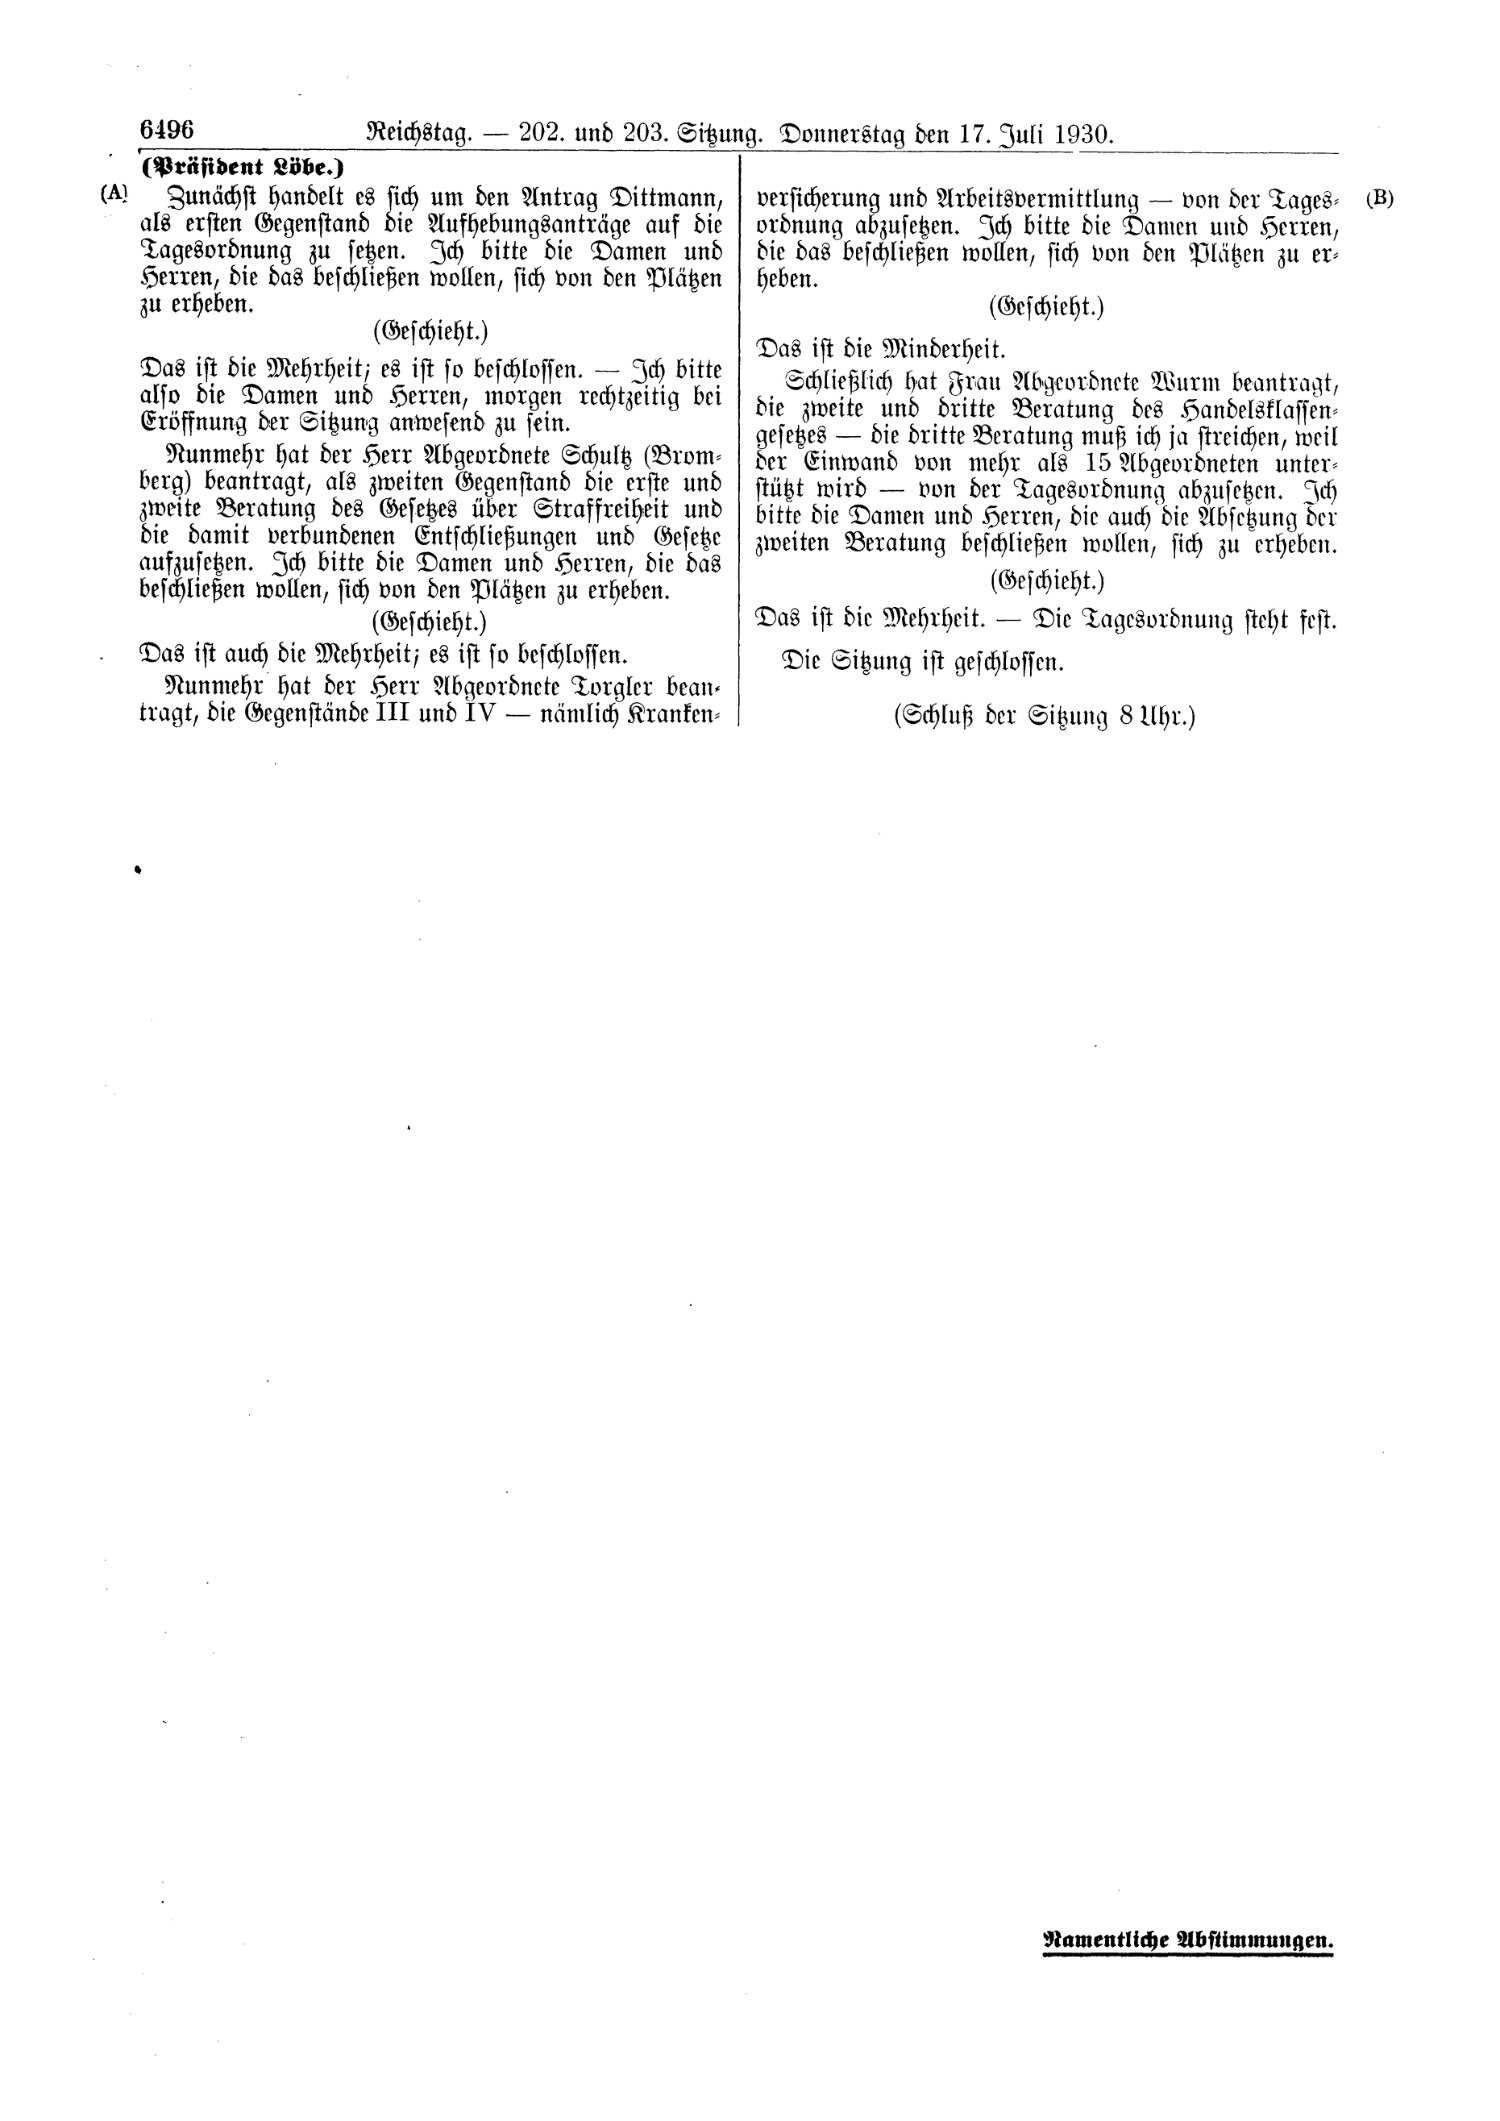 Scan of page 6496